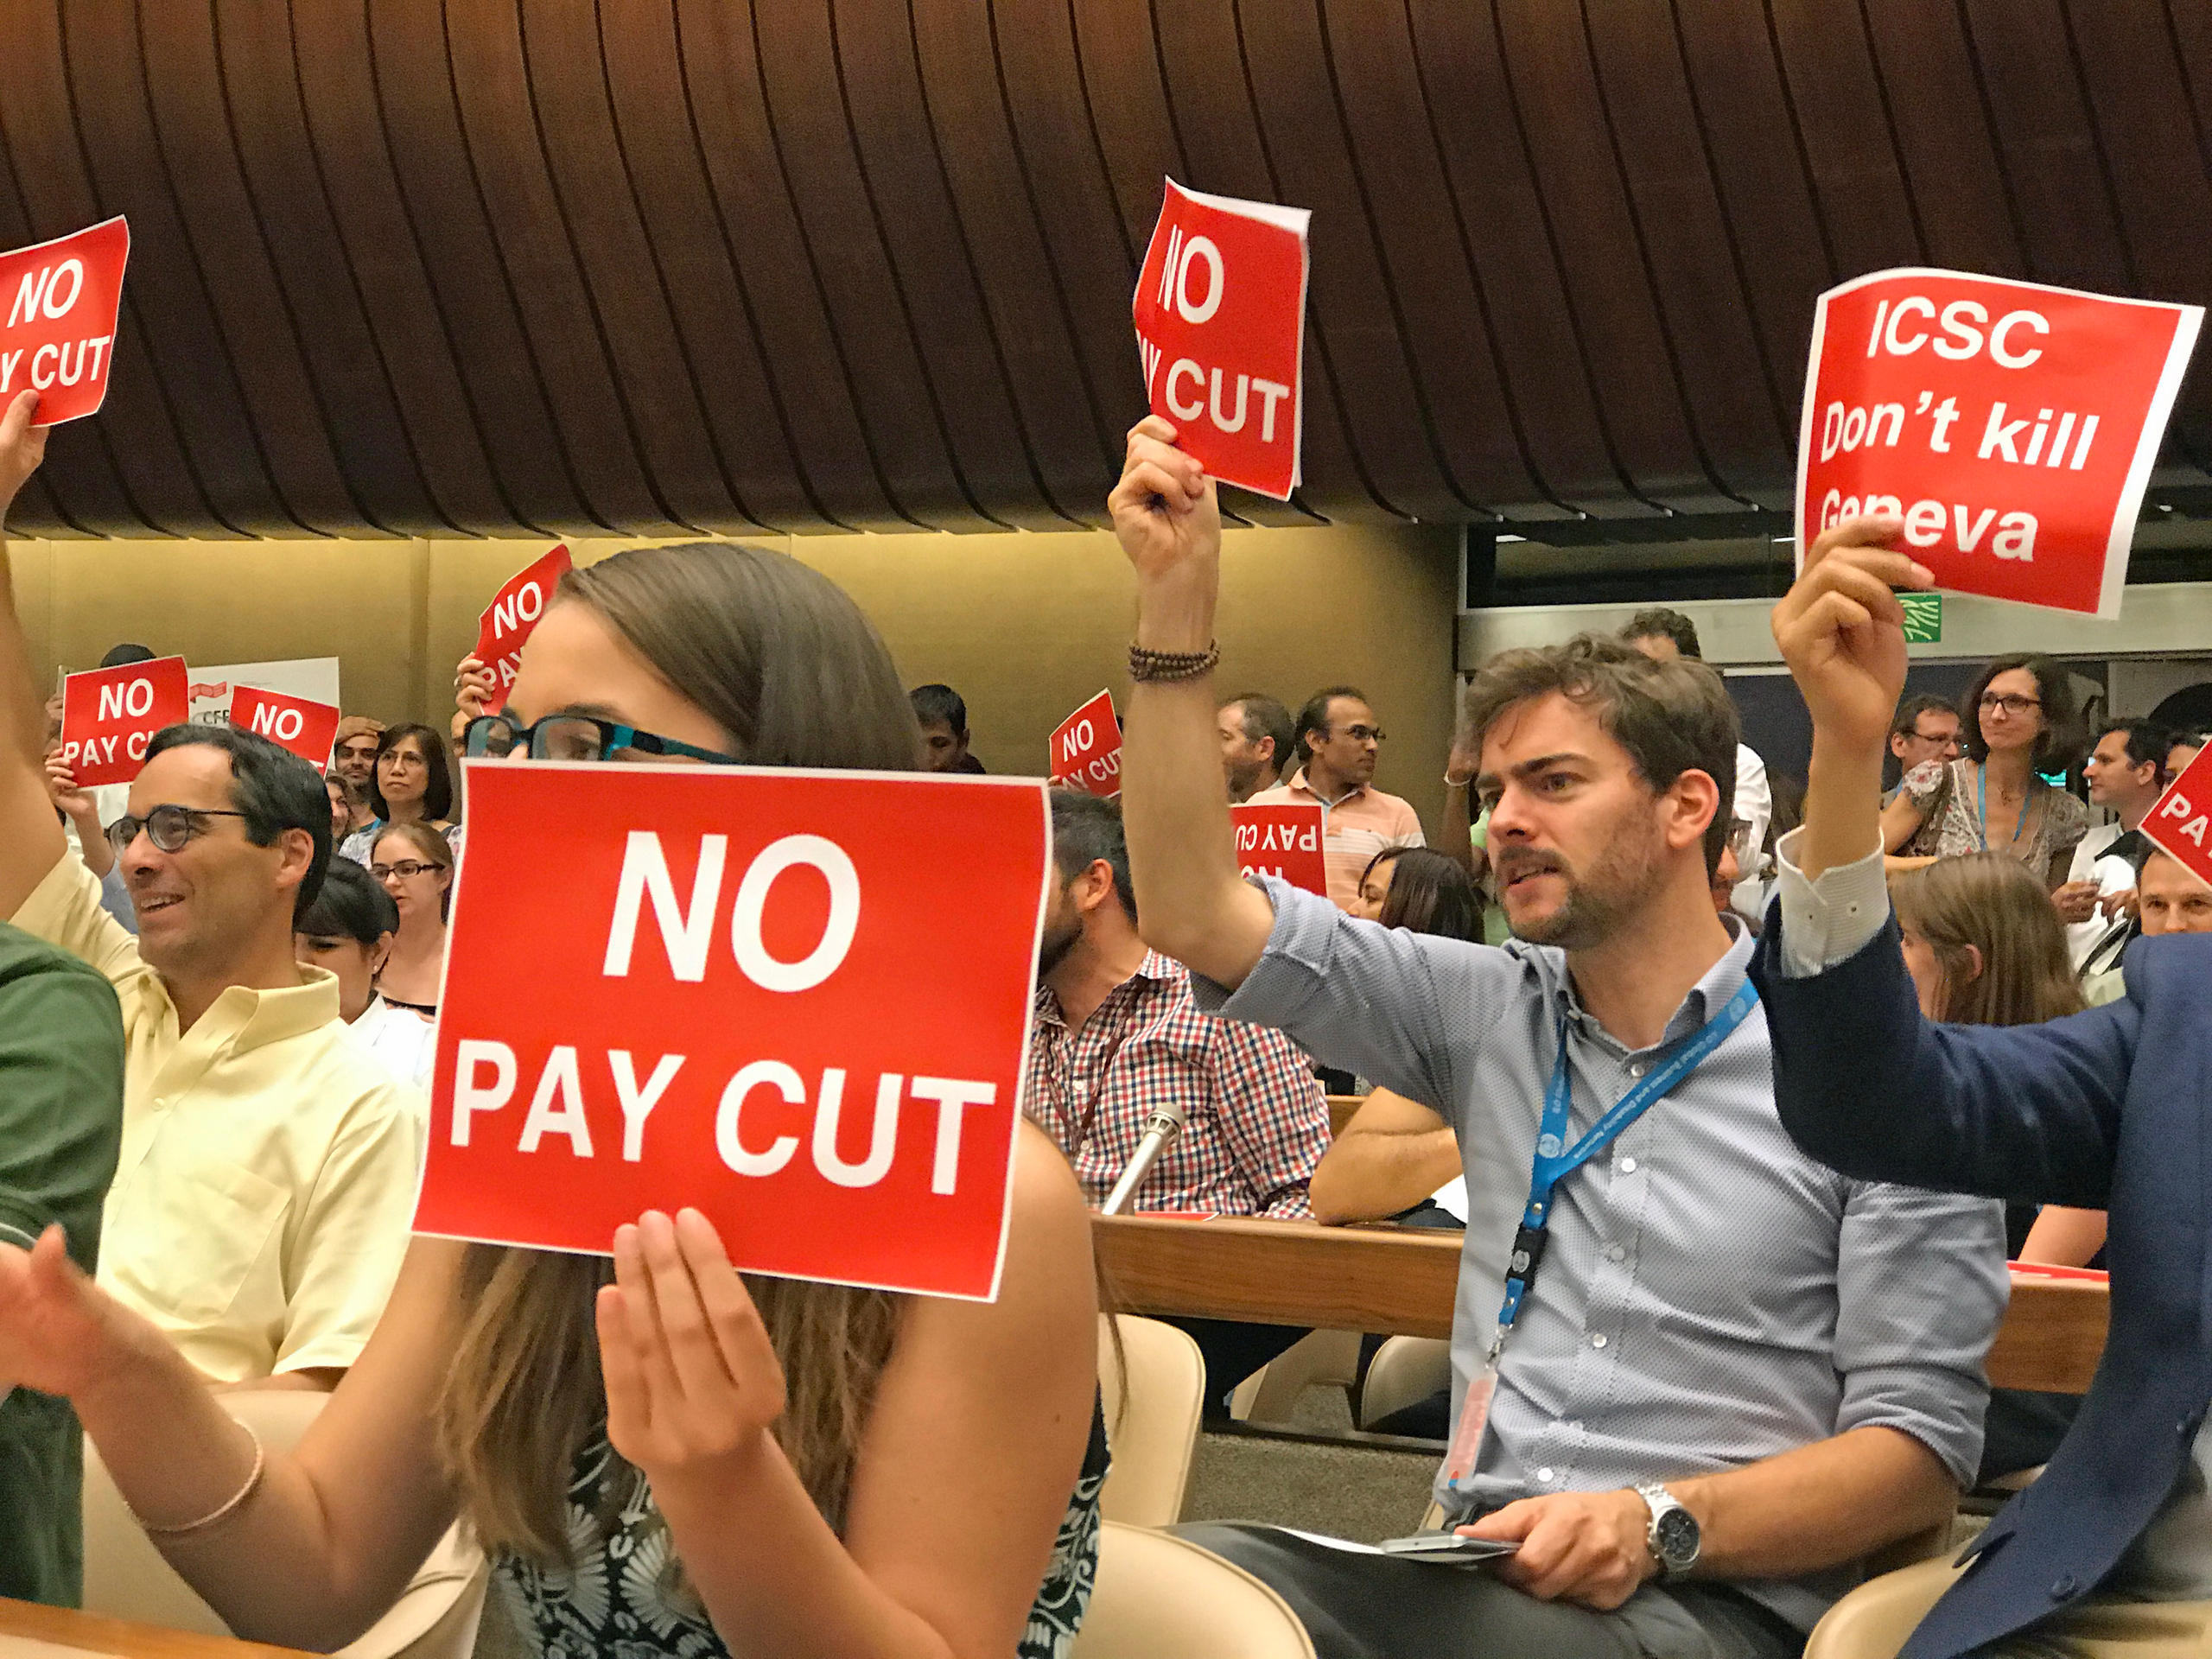 Around 600 angry UN staff protest against pay cut plans